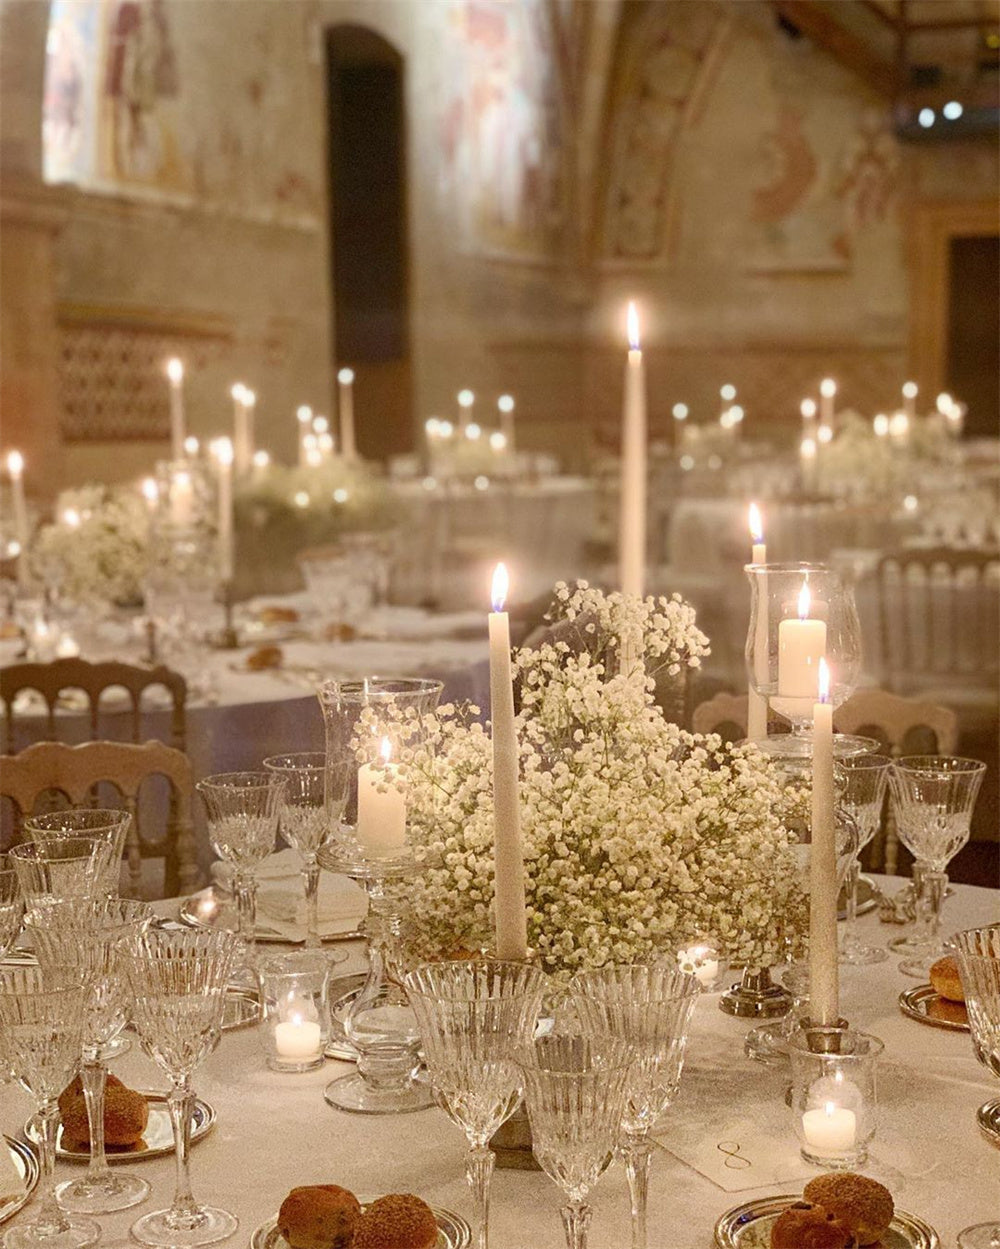 Baby's Breath Wedding Centerpieces with Candles